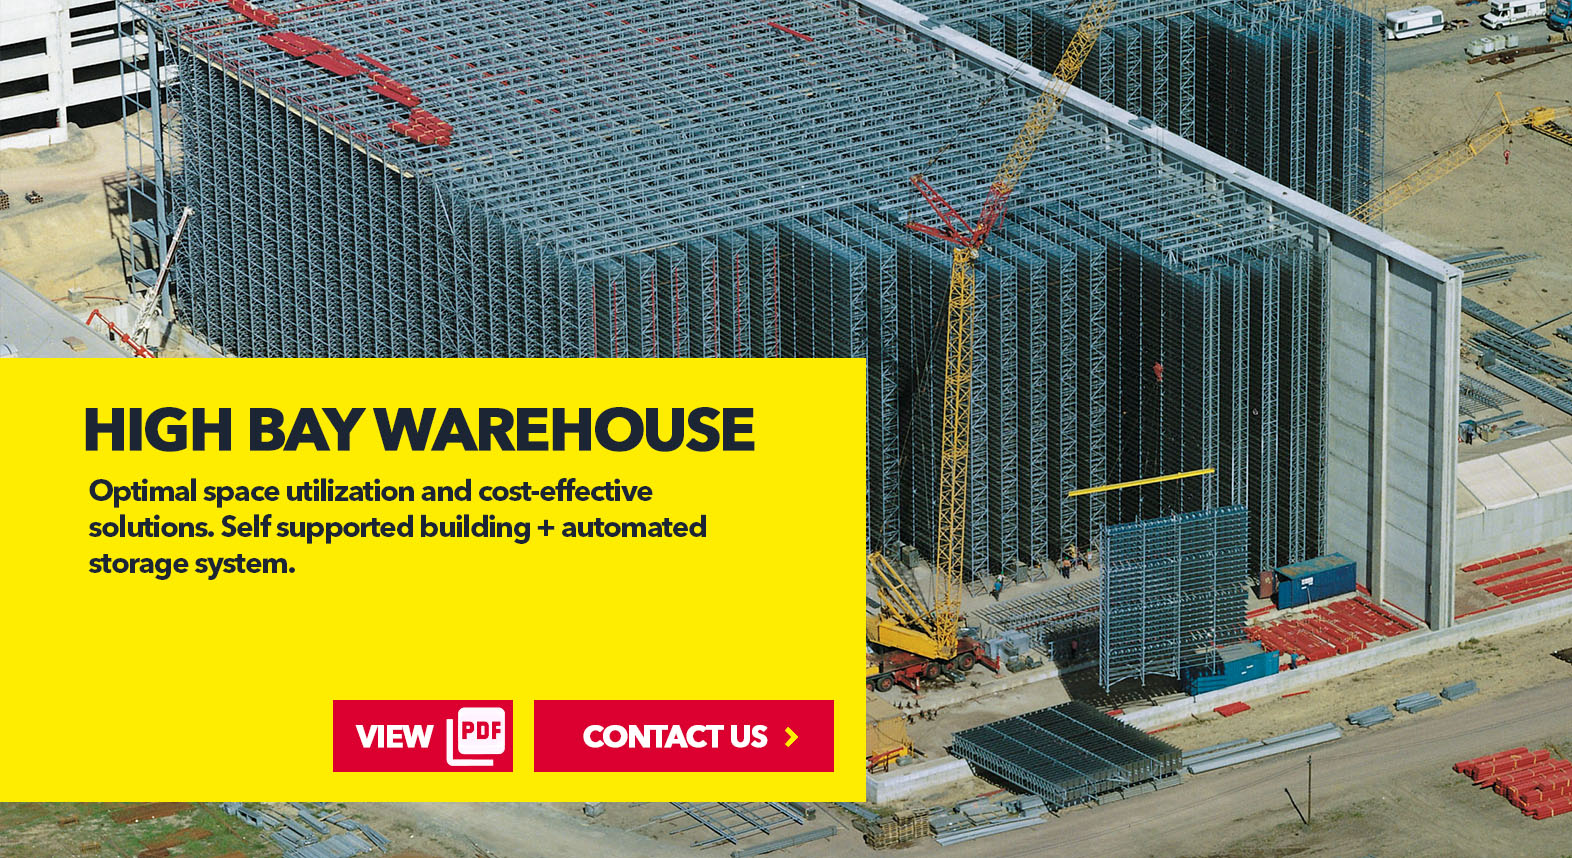 Pallet High Bay Warehouse by SSI Schaefer USA Download Guide, Watch Video, Contact Us. www.chaefershelving.com